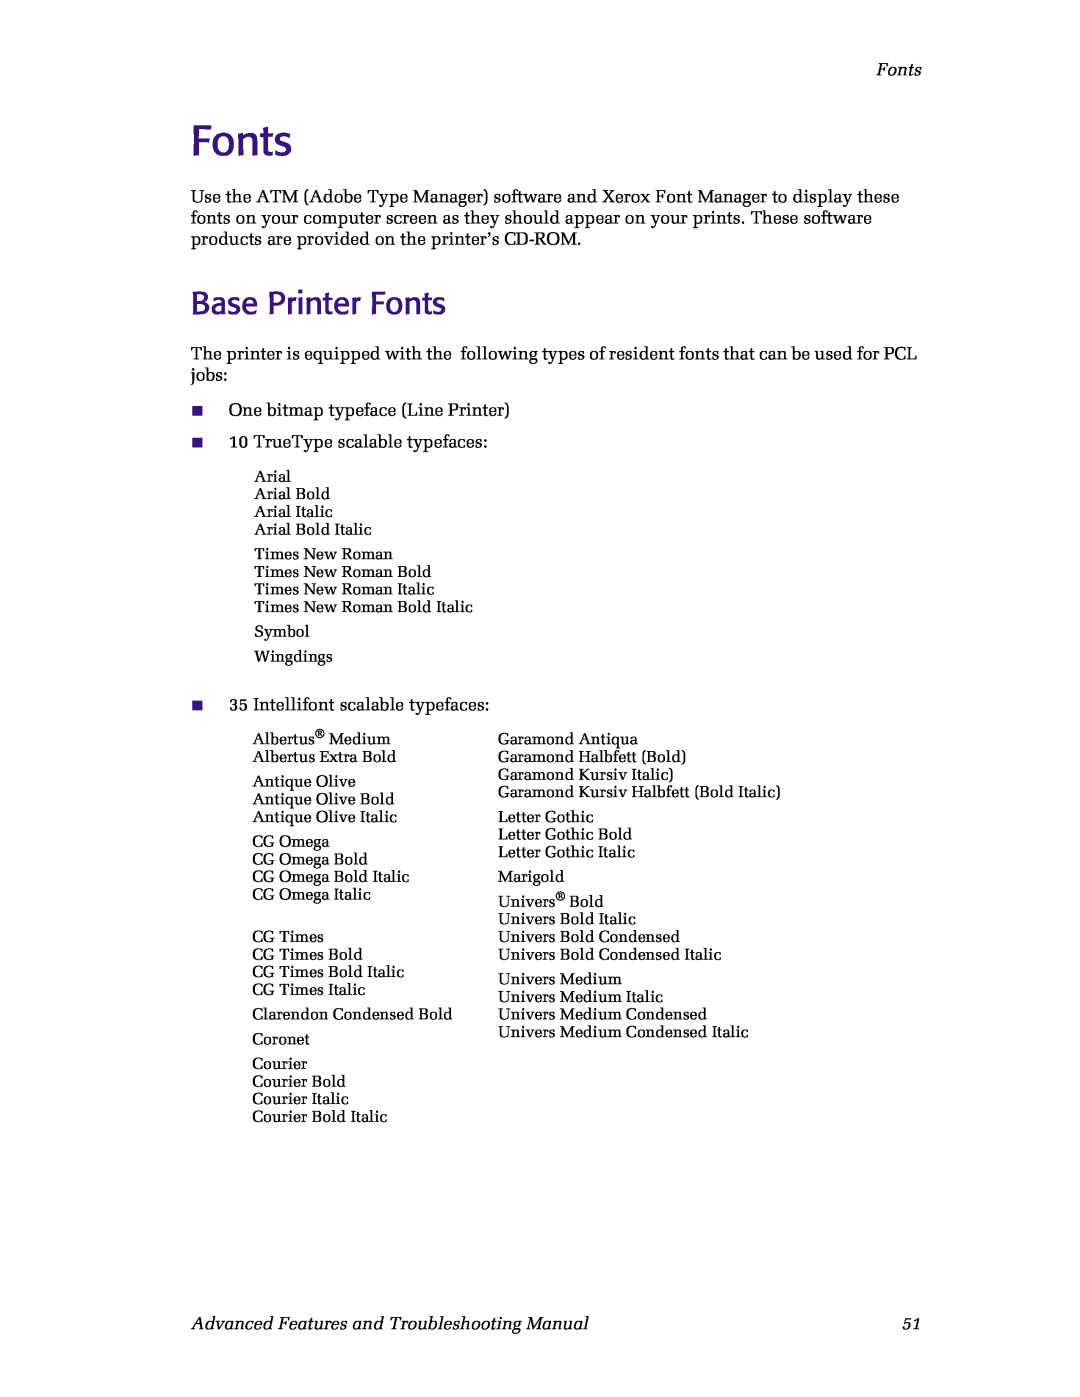 Xerox N4525 manual Base Printer Fonts, Advanced Features and Troubleshooting Manual 